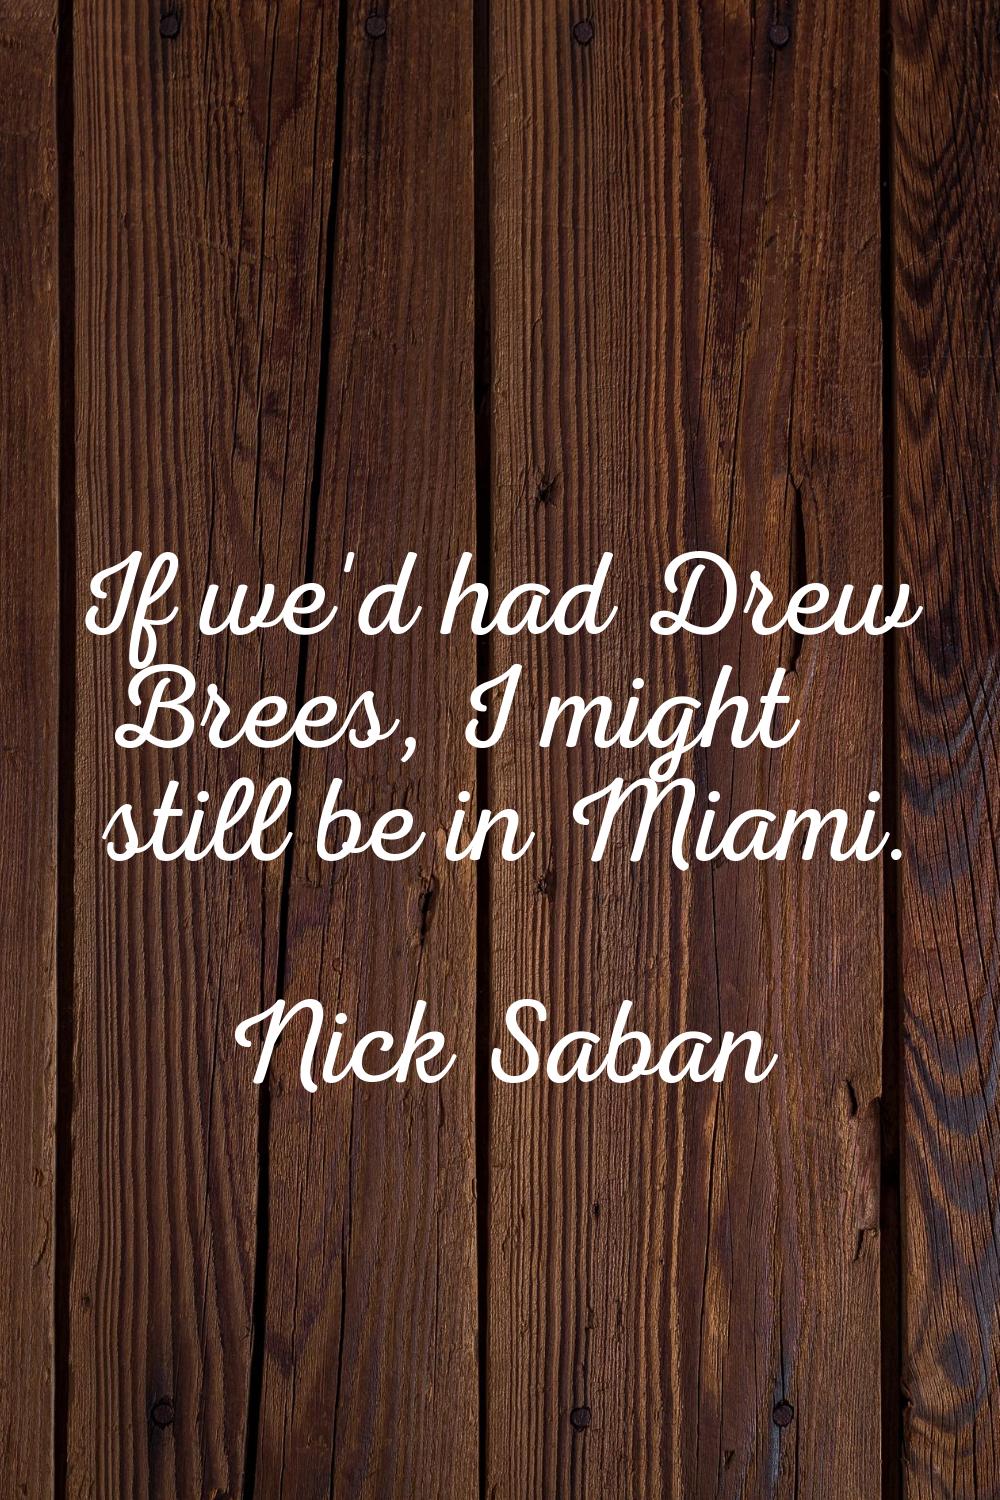 If we'd had Drew Brees, I might still be in Miami.